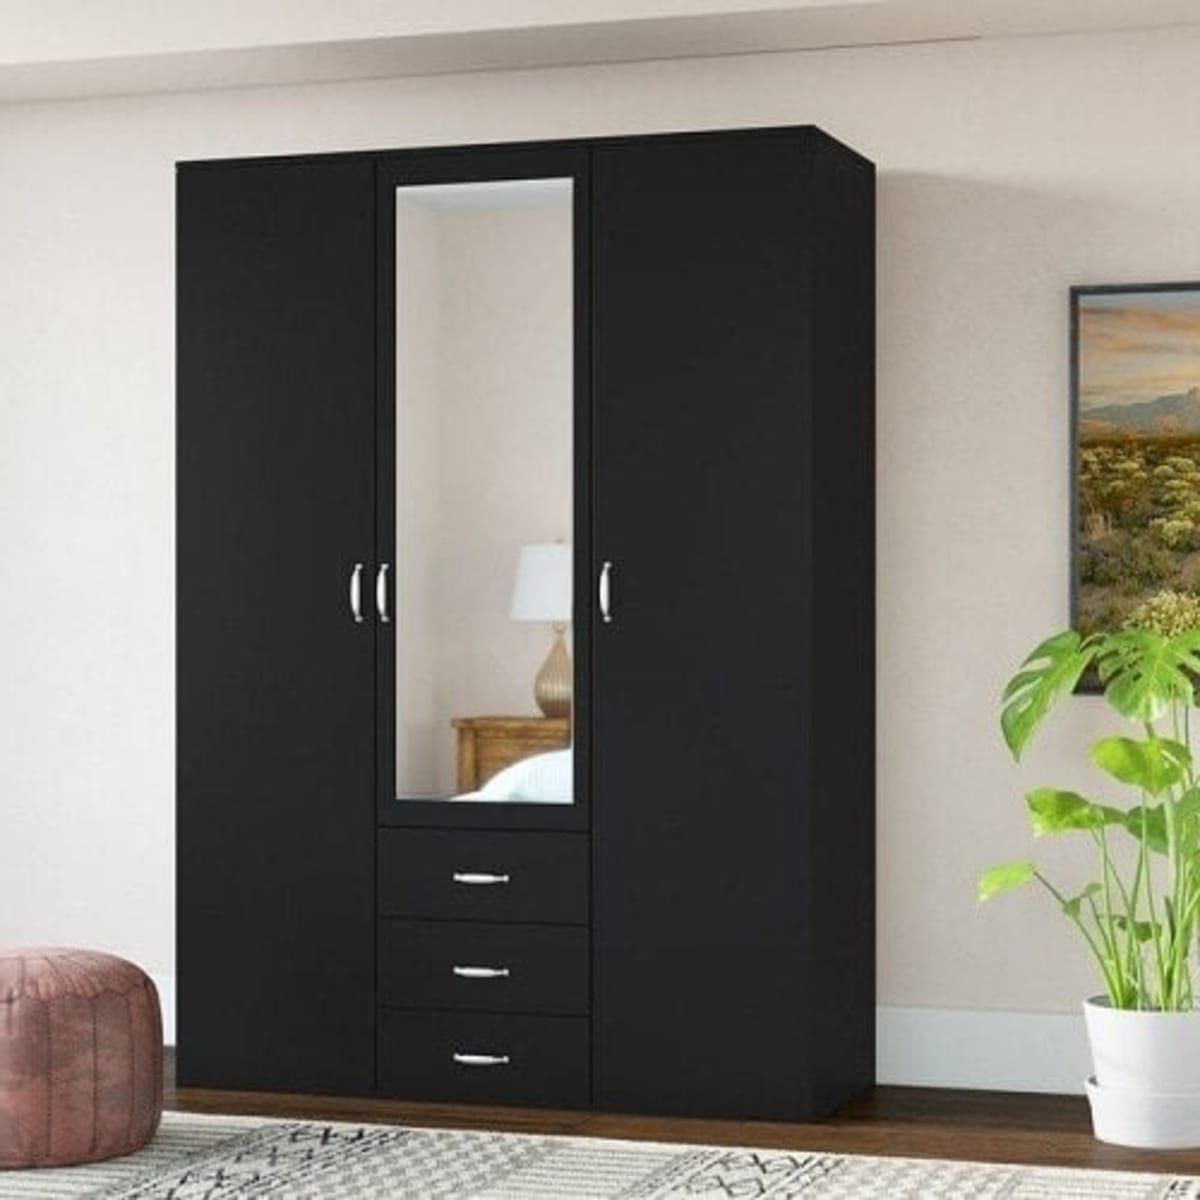 Beyond 3 Door Wardrobe With 3 Drawer And Mirror Black | Konga Online  Shopping Within Wardrobes 3 Door With Mirror (View 6 of 20)